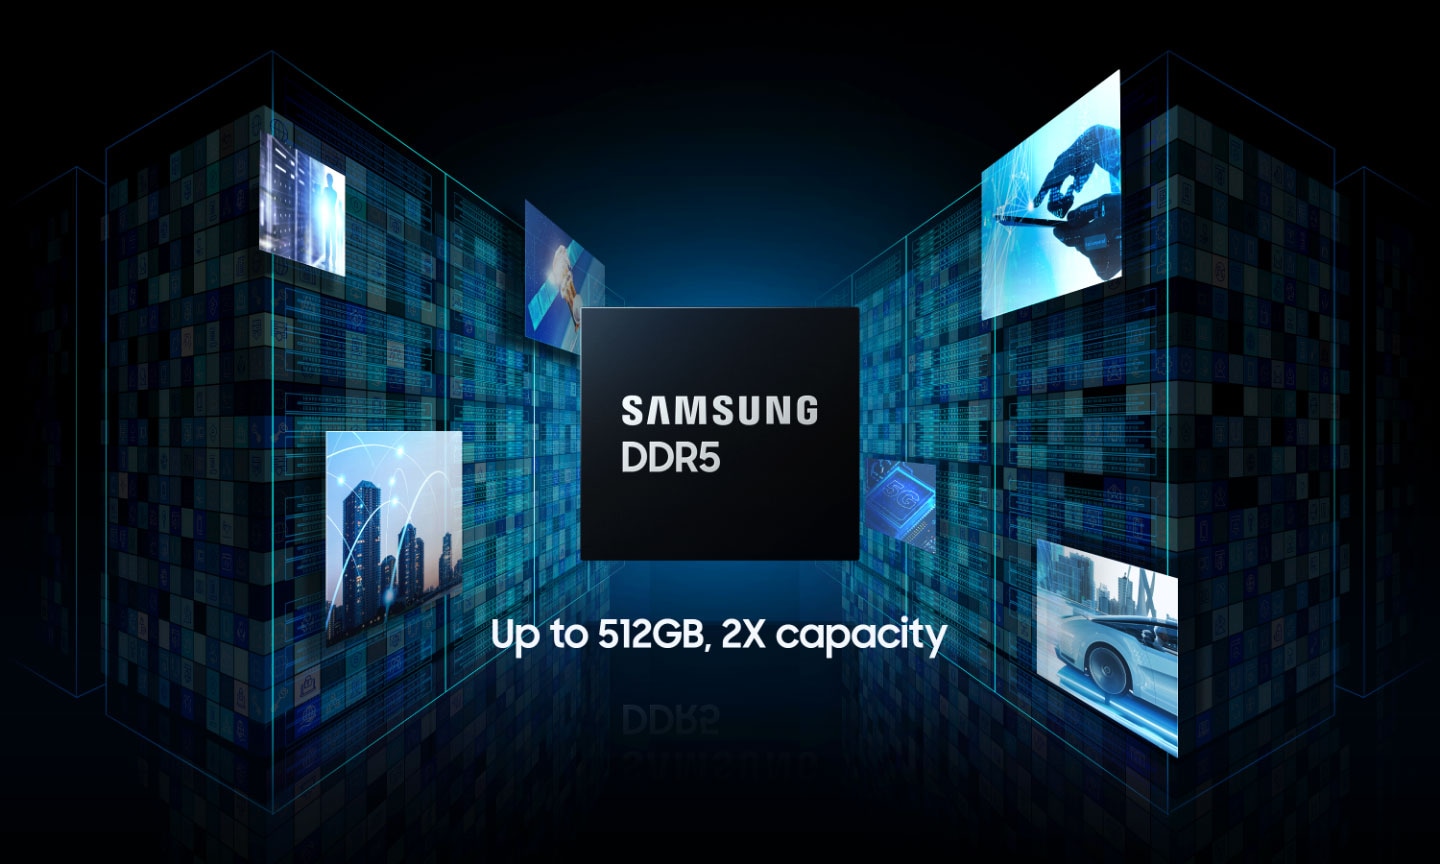 An image of float the Samsung DDR5 chip and variety of application images in the datacenter, with 'Up to 512GB, 2X capacity' typography.